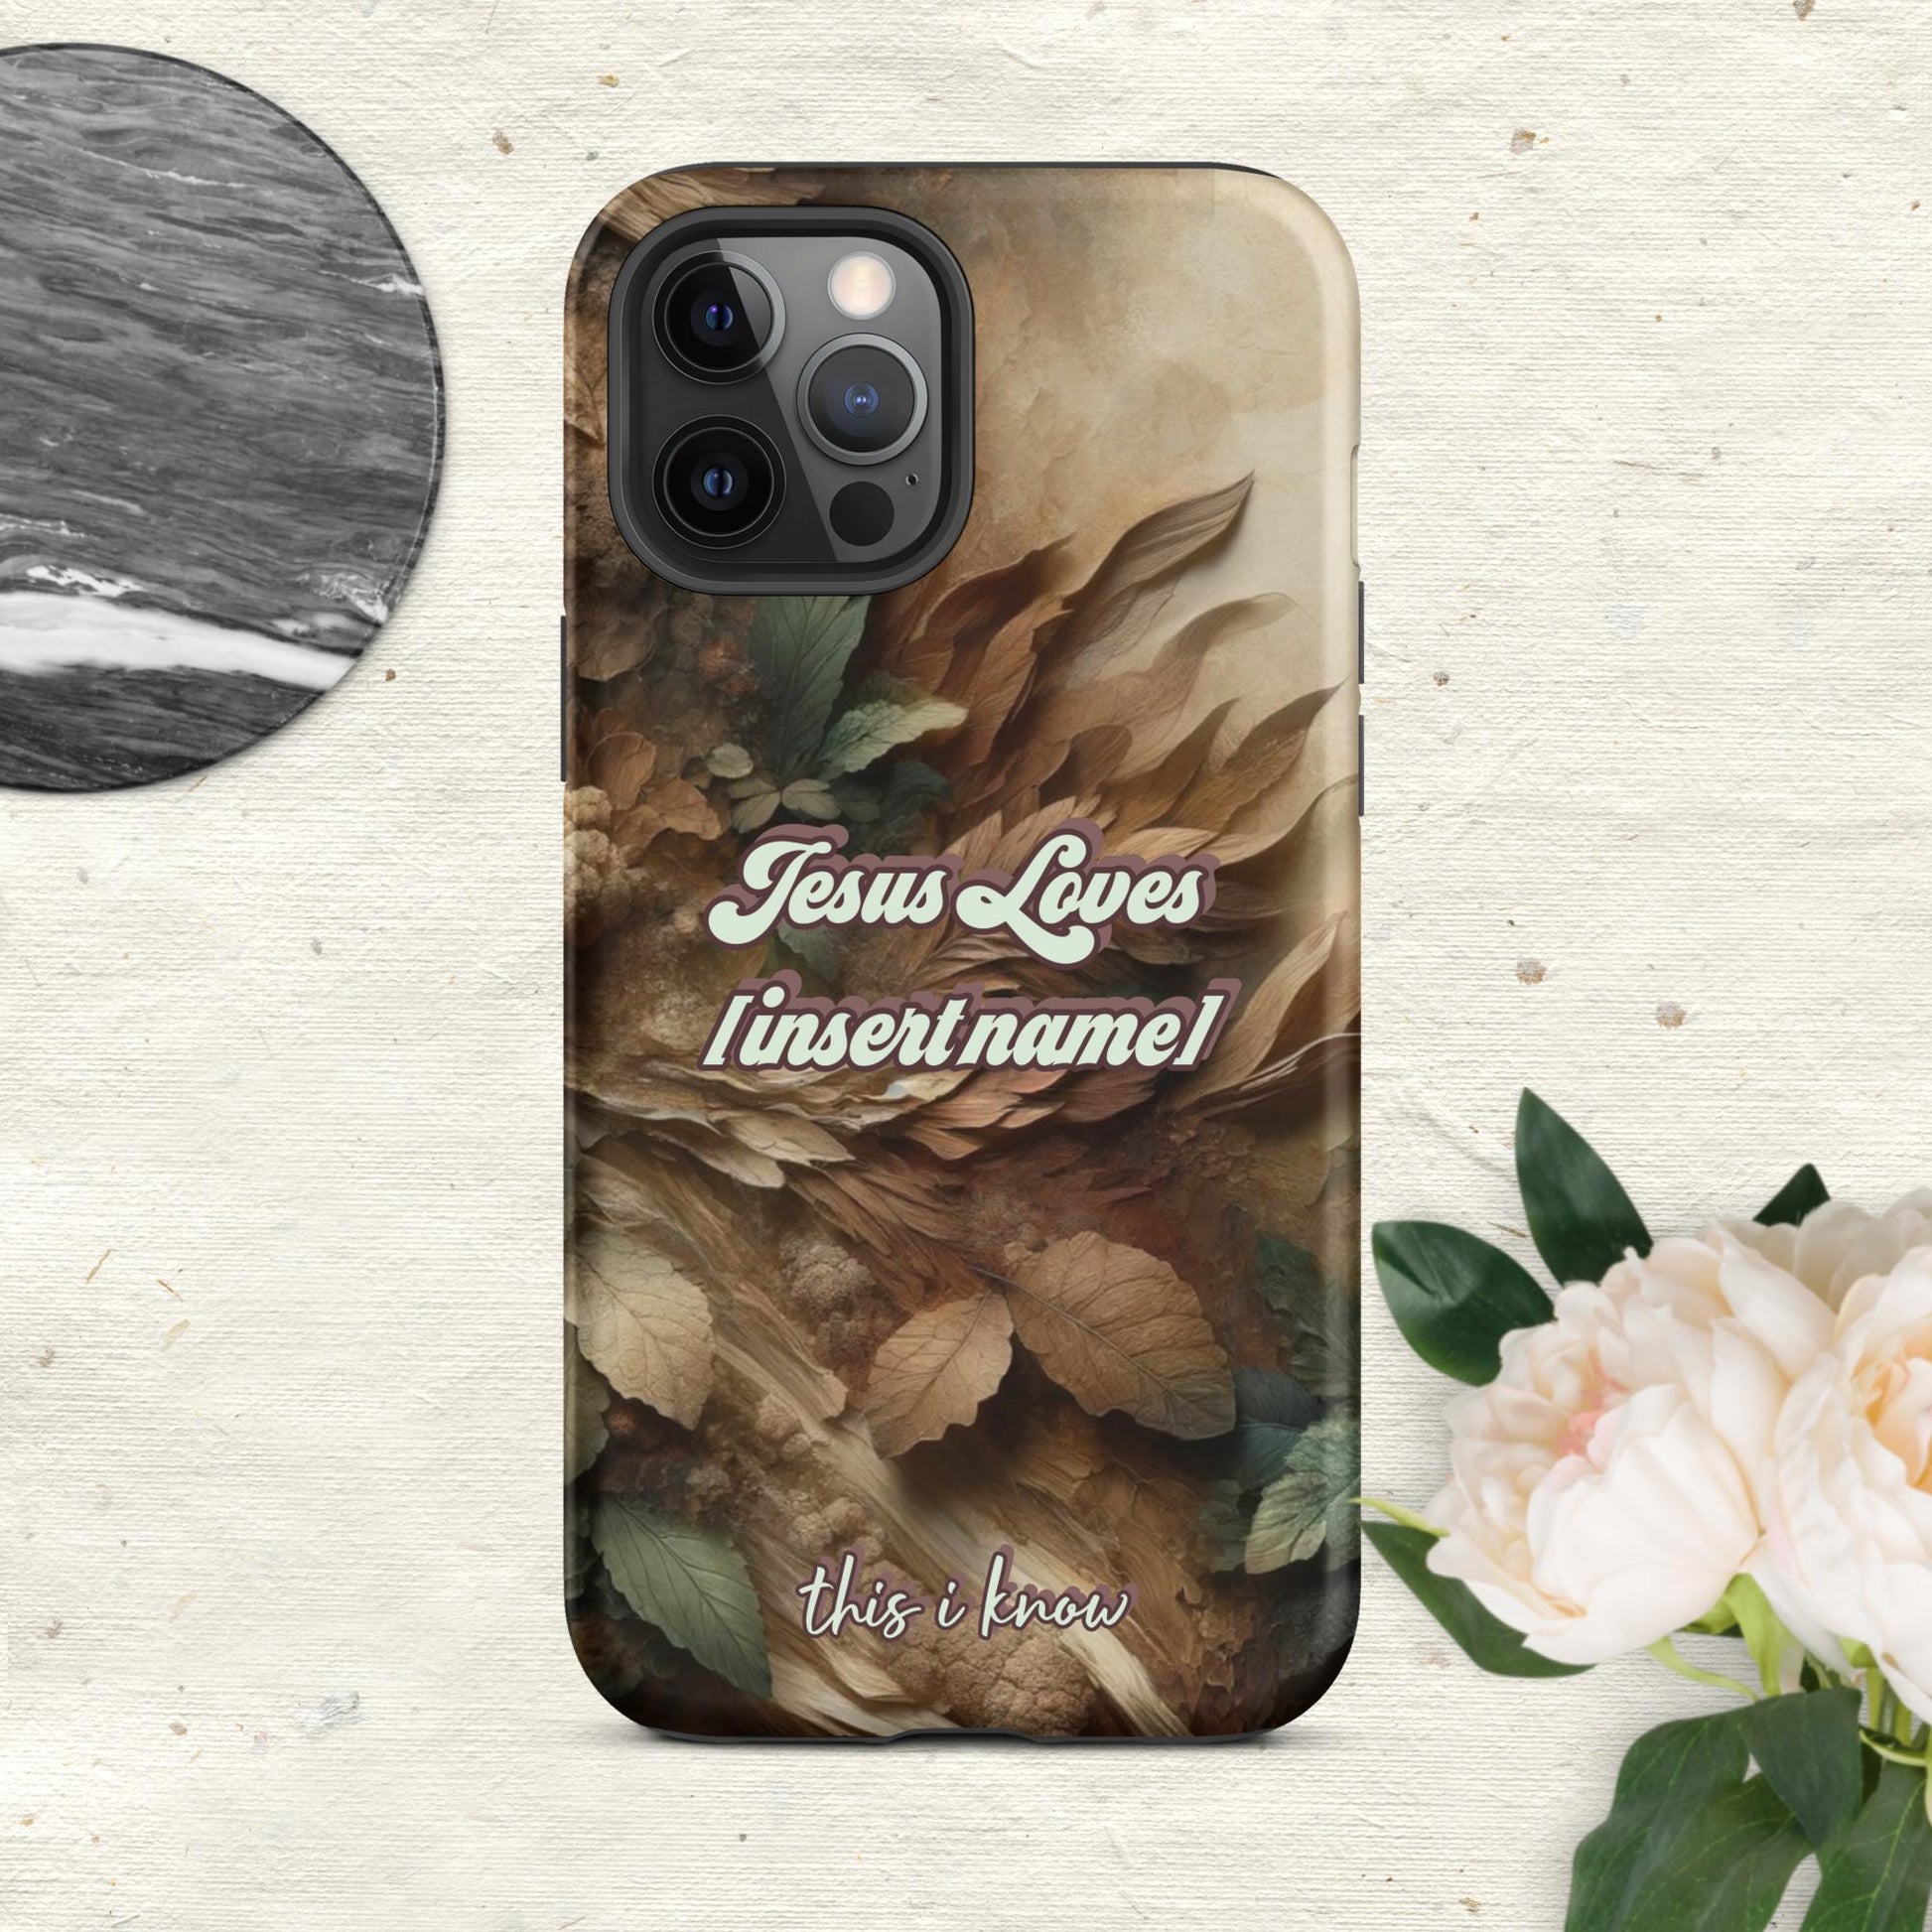 Trendyguard Matte / iPhone 12 Pro Max Jesus Loves [insertname] This I Know | Custom Tough Case for iPhone®